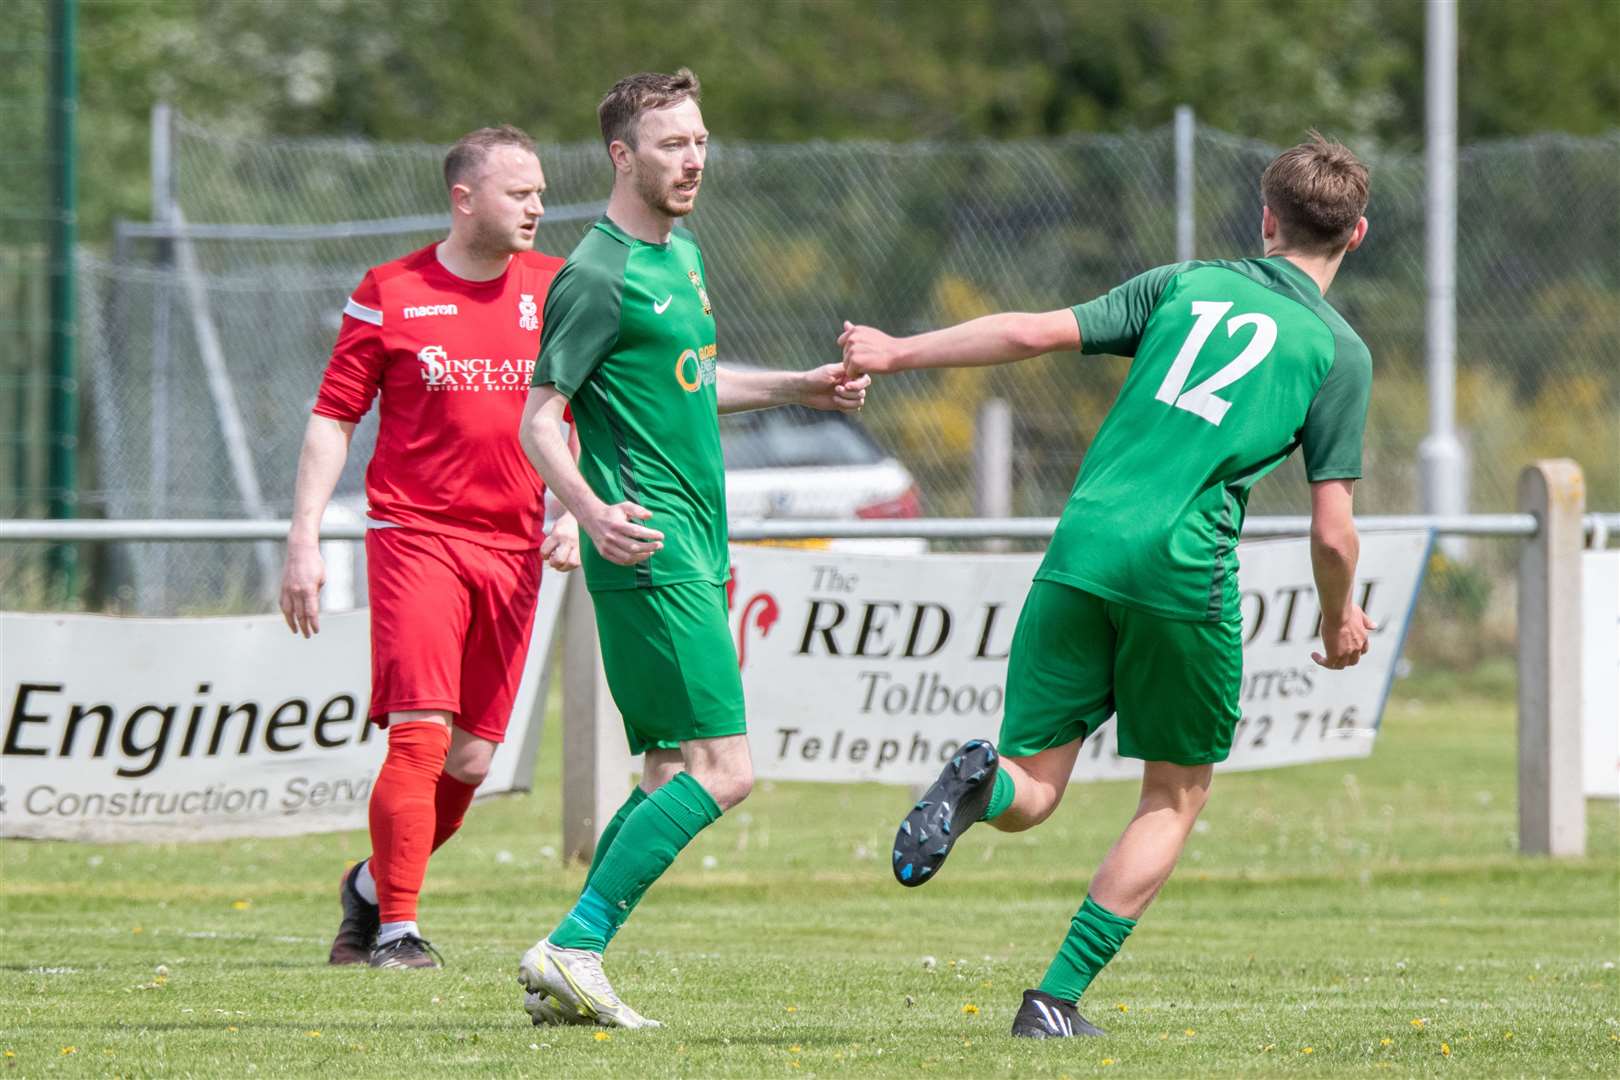 Dufftown's Ben Cullen wheels away to celebrate the opening goal. ..Dufftown FC (2) vs Forres Thistle FC (2) - Dufftown FC win 5-3 on penalties - Elginshire Cup Final held at Logie Park, Forres 14/05/2022...Picture: Daniel Forsyth..